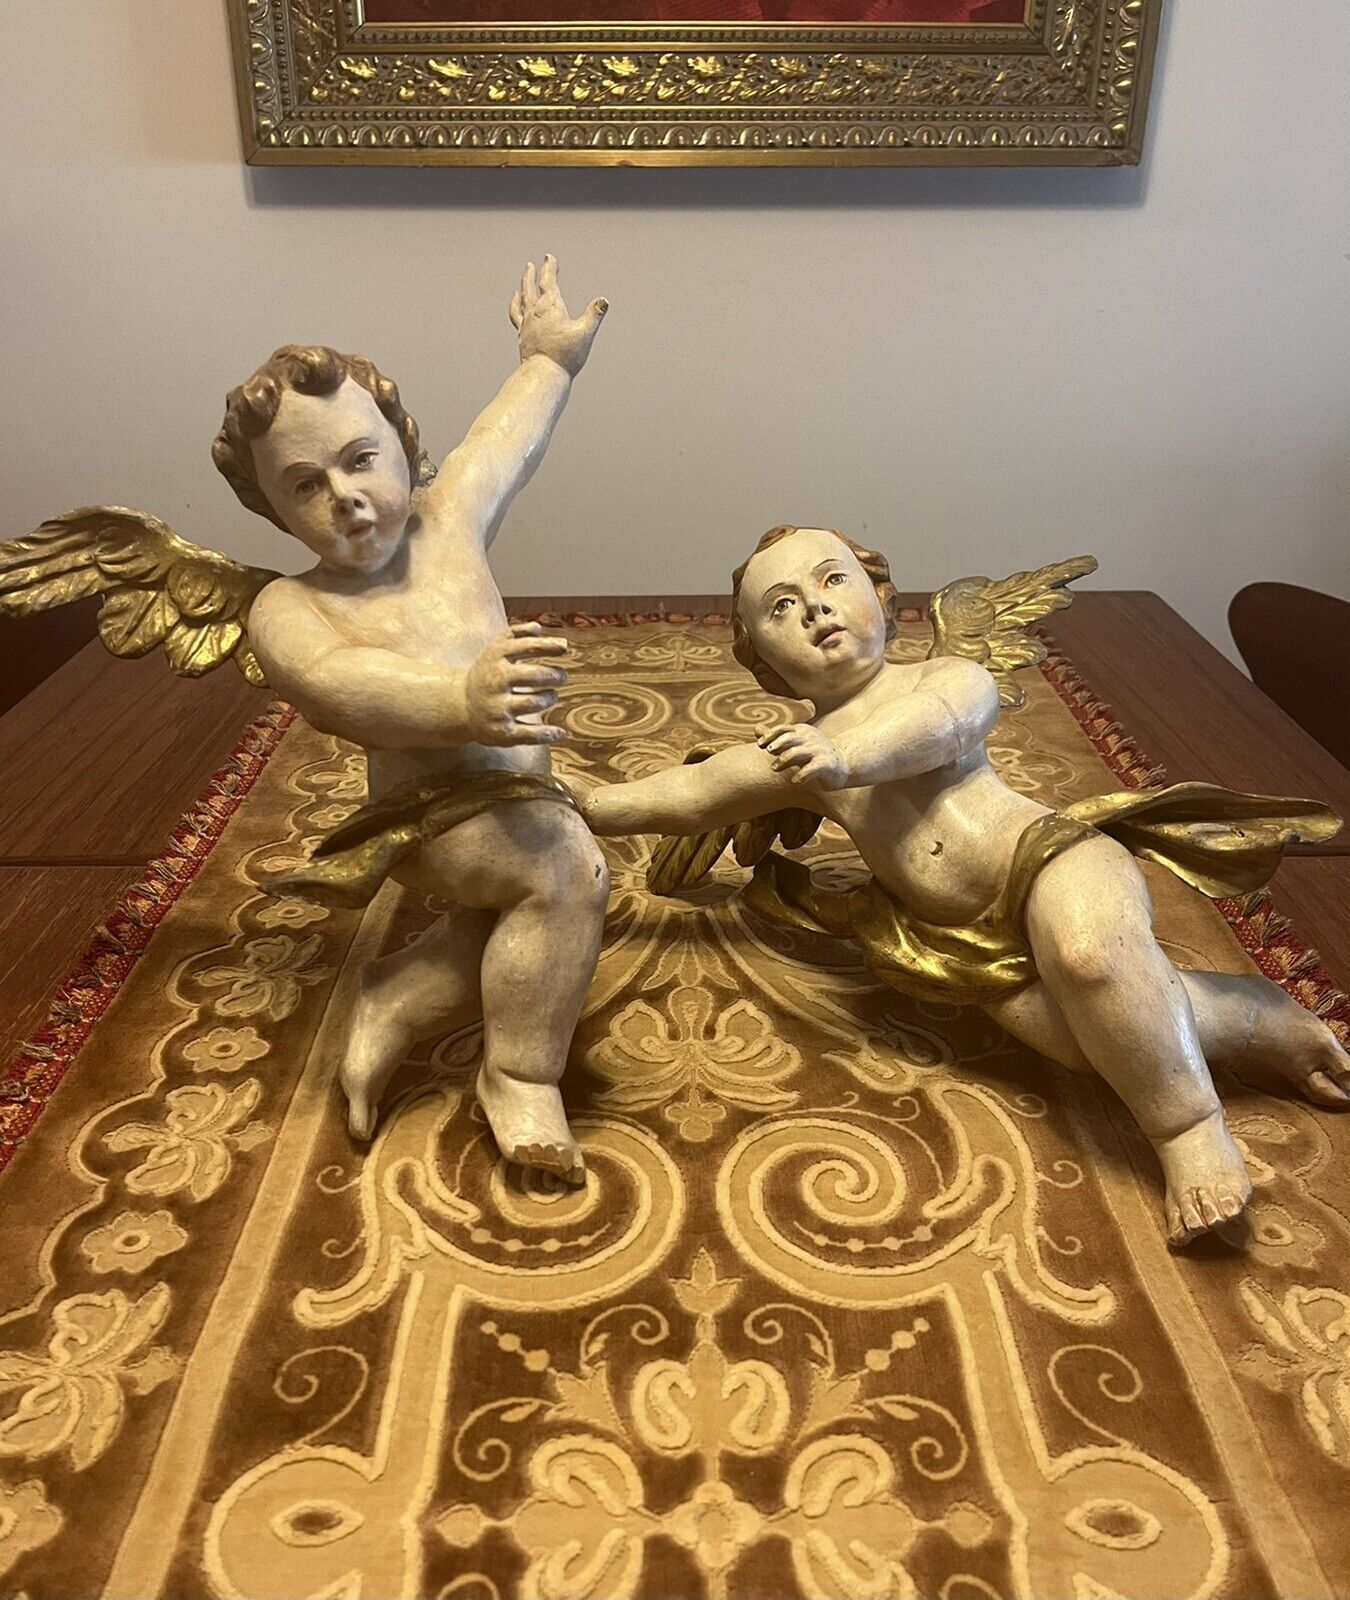 Antique Pair of Putti/angels from Germany. 18th Century/wood.  2 figures